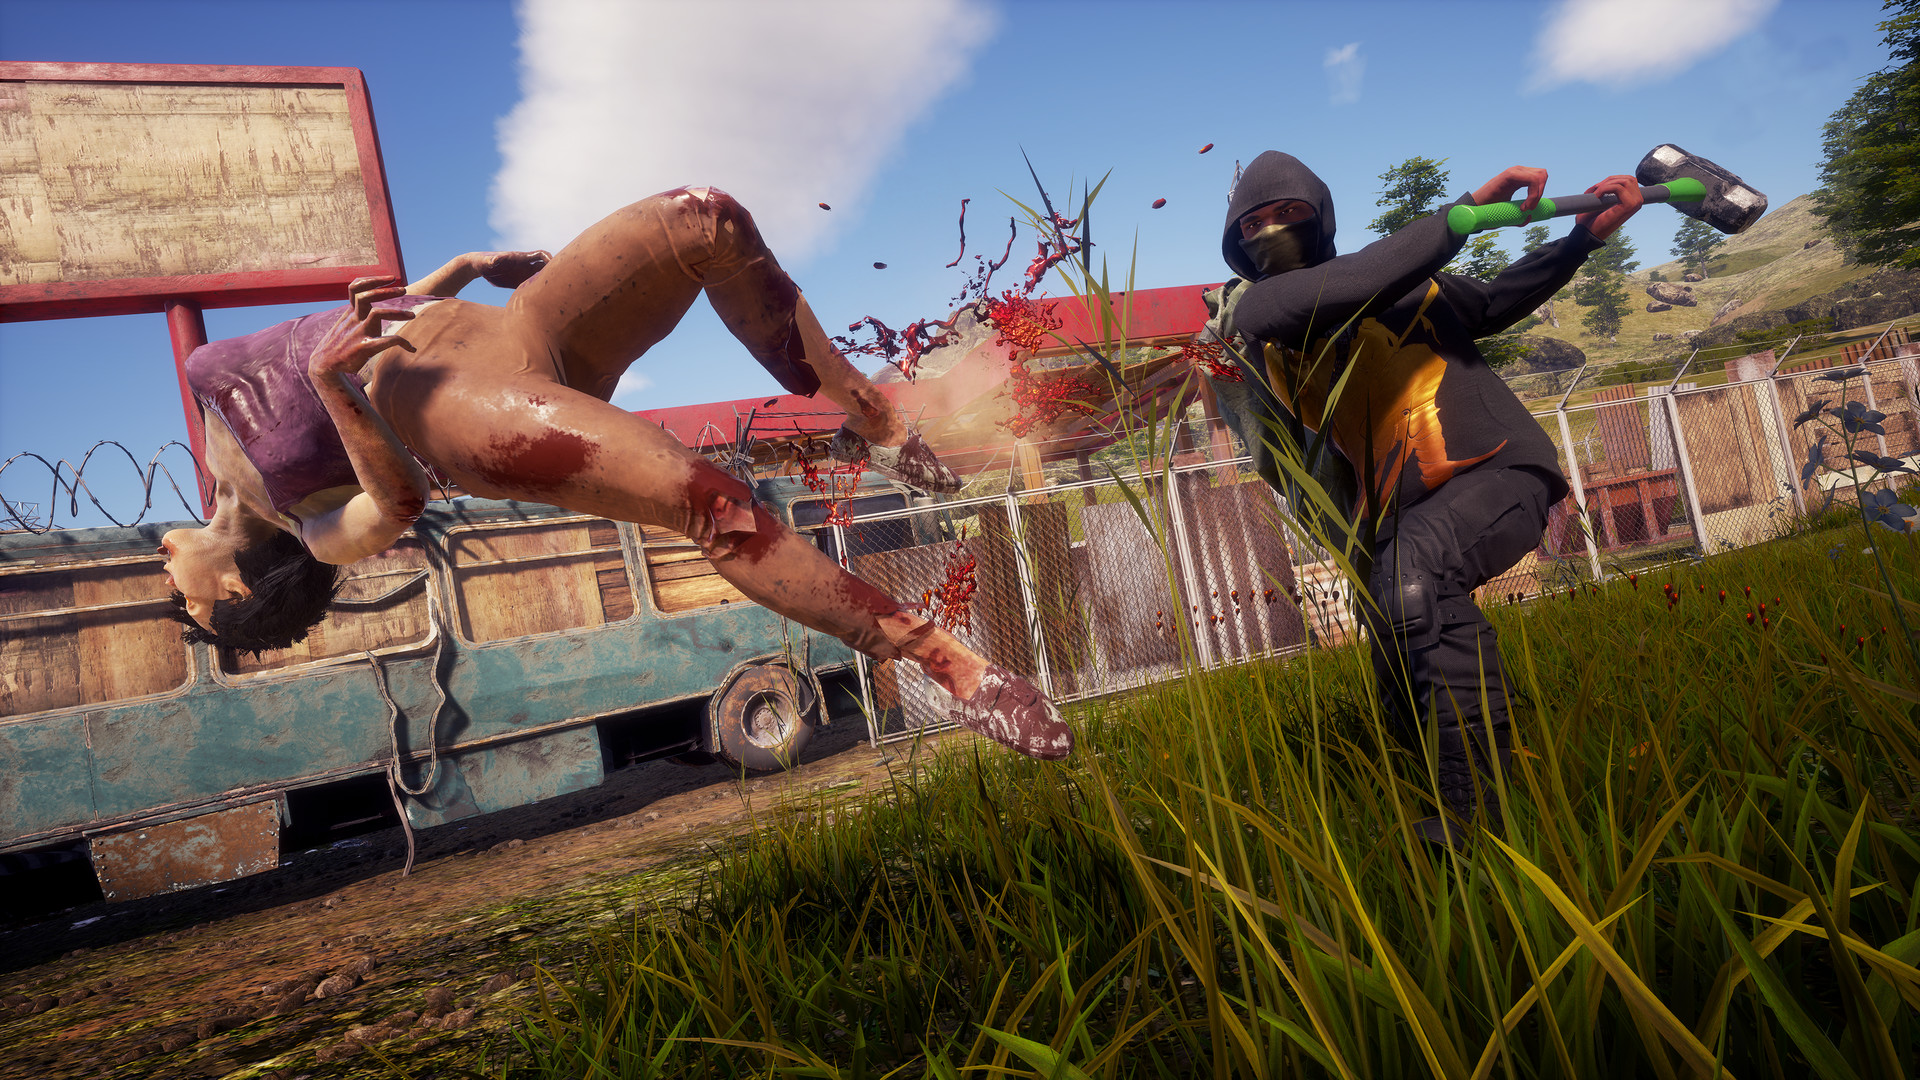 State of Decay 2: Juggernaut Edition on Steam